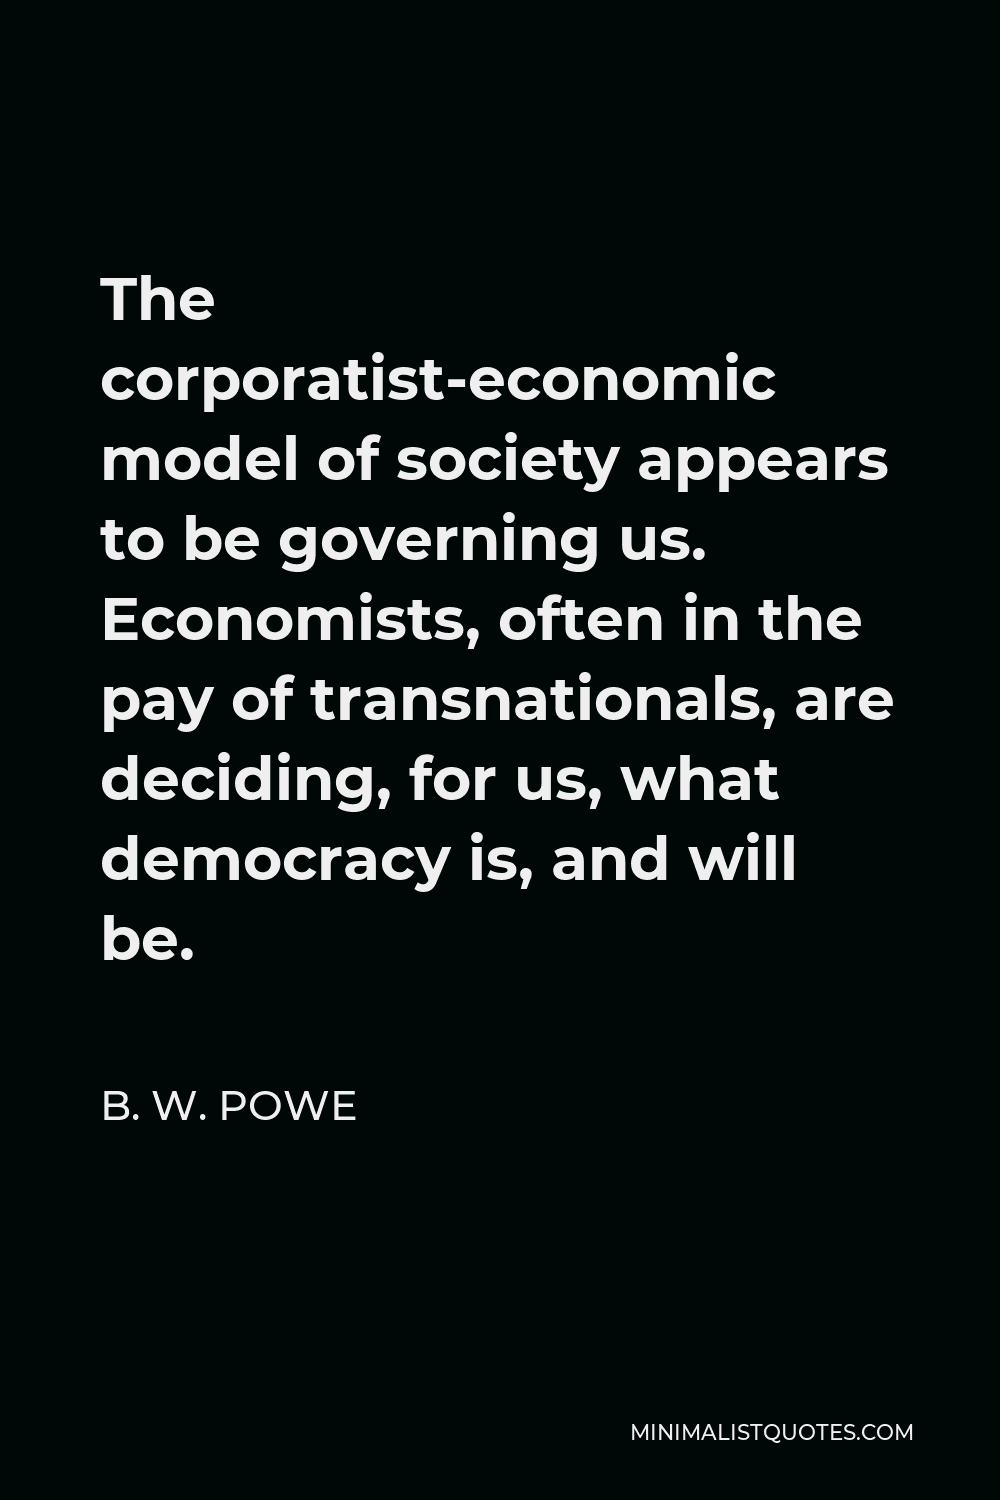 B. W. Powe Quote - The corporatist-economic model of society appears to be governing us. Economists, often in the pay of transnationals, are deciding, for us, what democracy is, and will be.